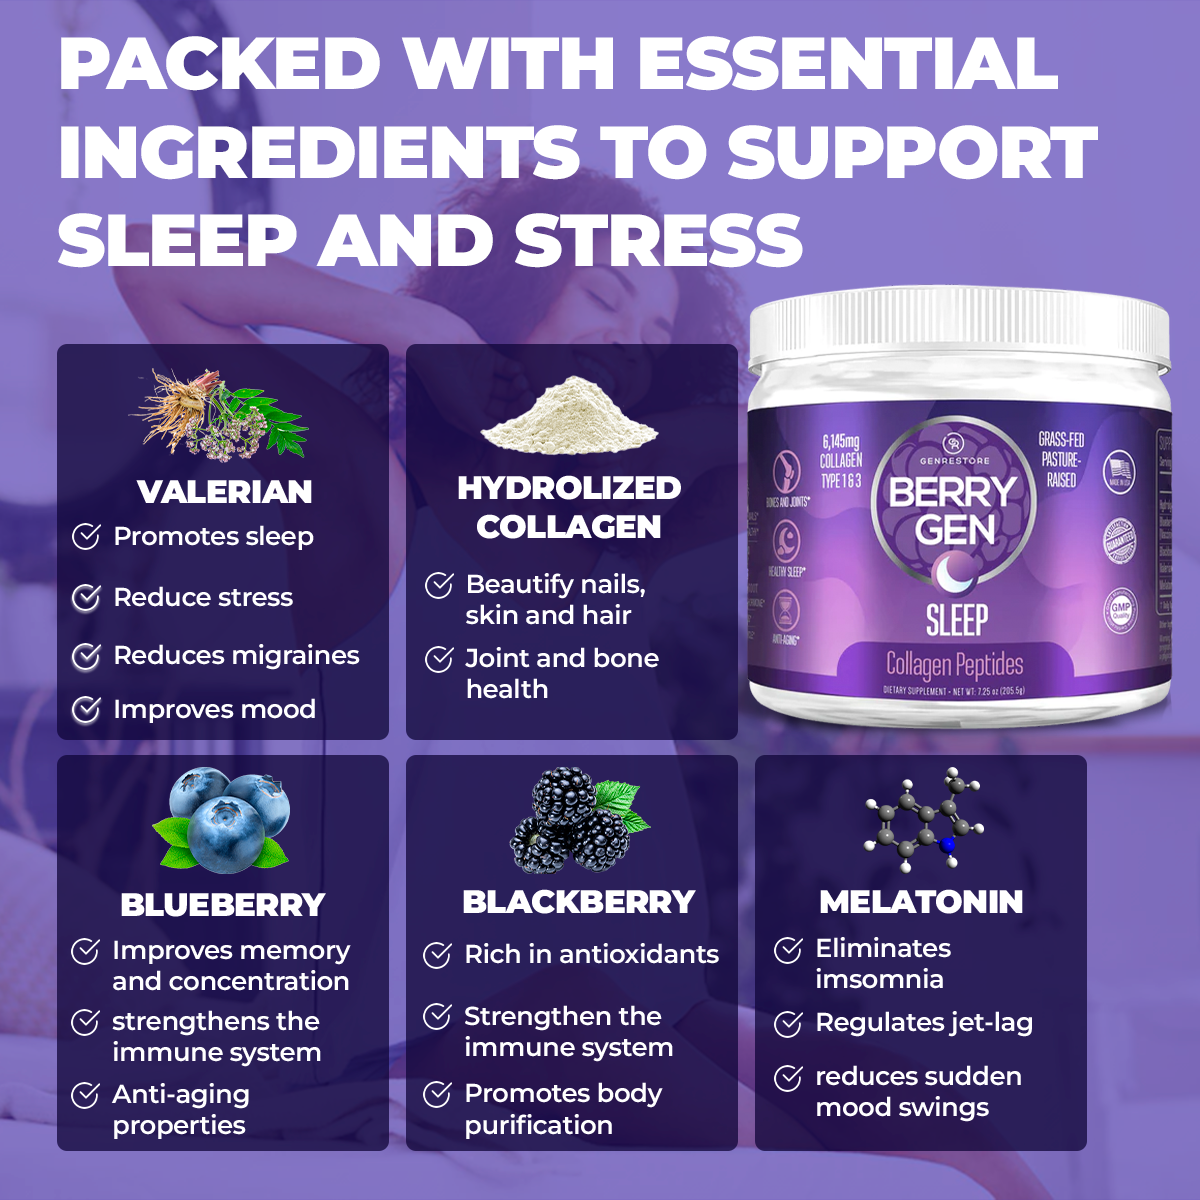 Enhance your sleep quality with the best sleep supplement. Our natural formula promotes restful nights and wakes you refreshed. Try Berry Gen's sleep powder!